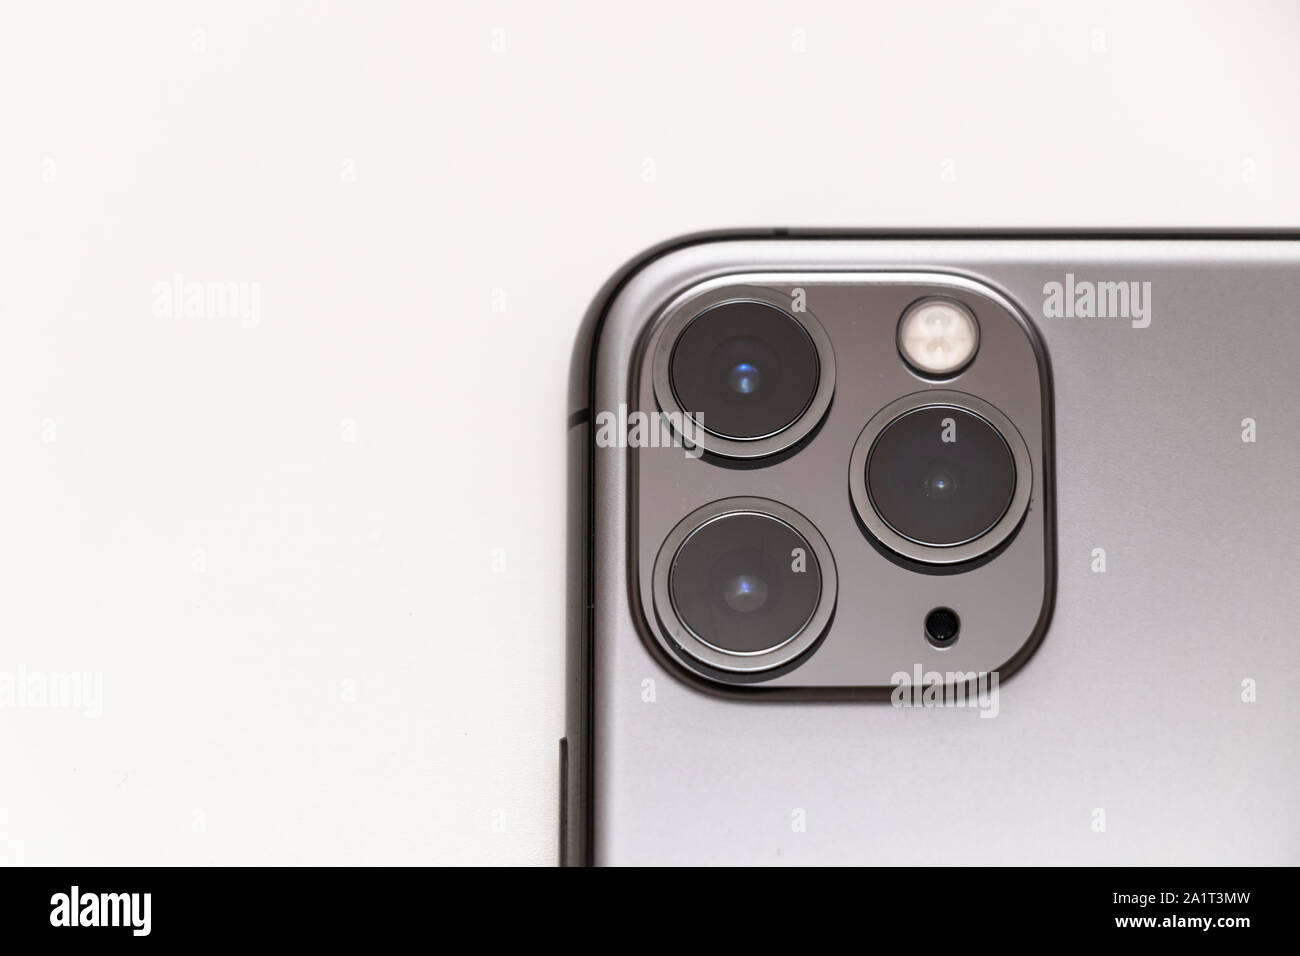 Close Up Of New 3 Camera Design On Space Grey Iphone 11 Pro Max Stock Photo Alamy